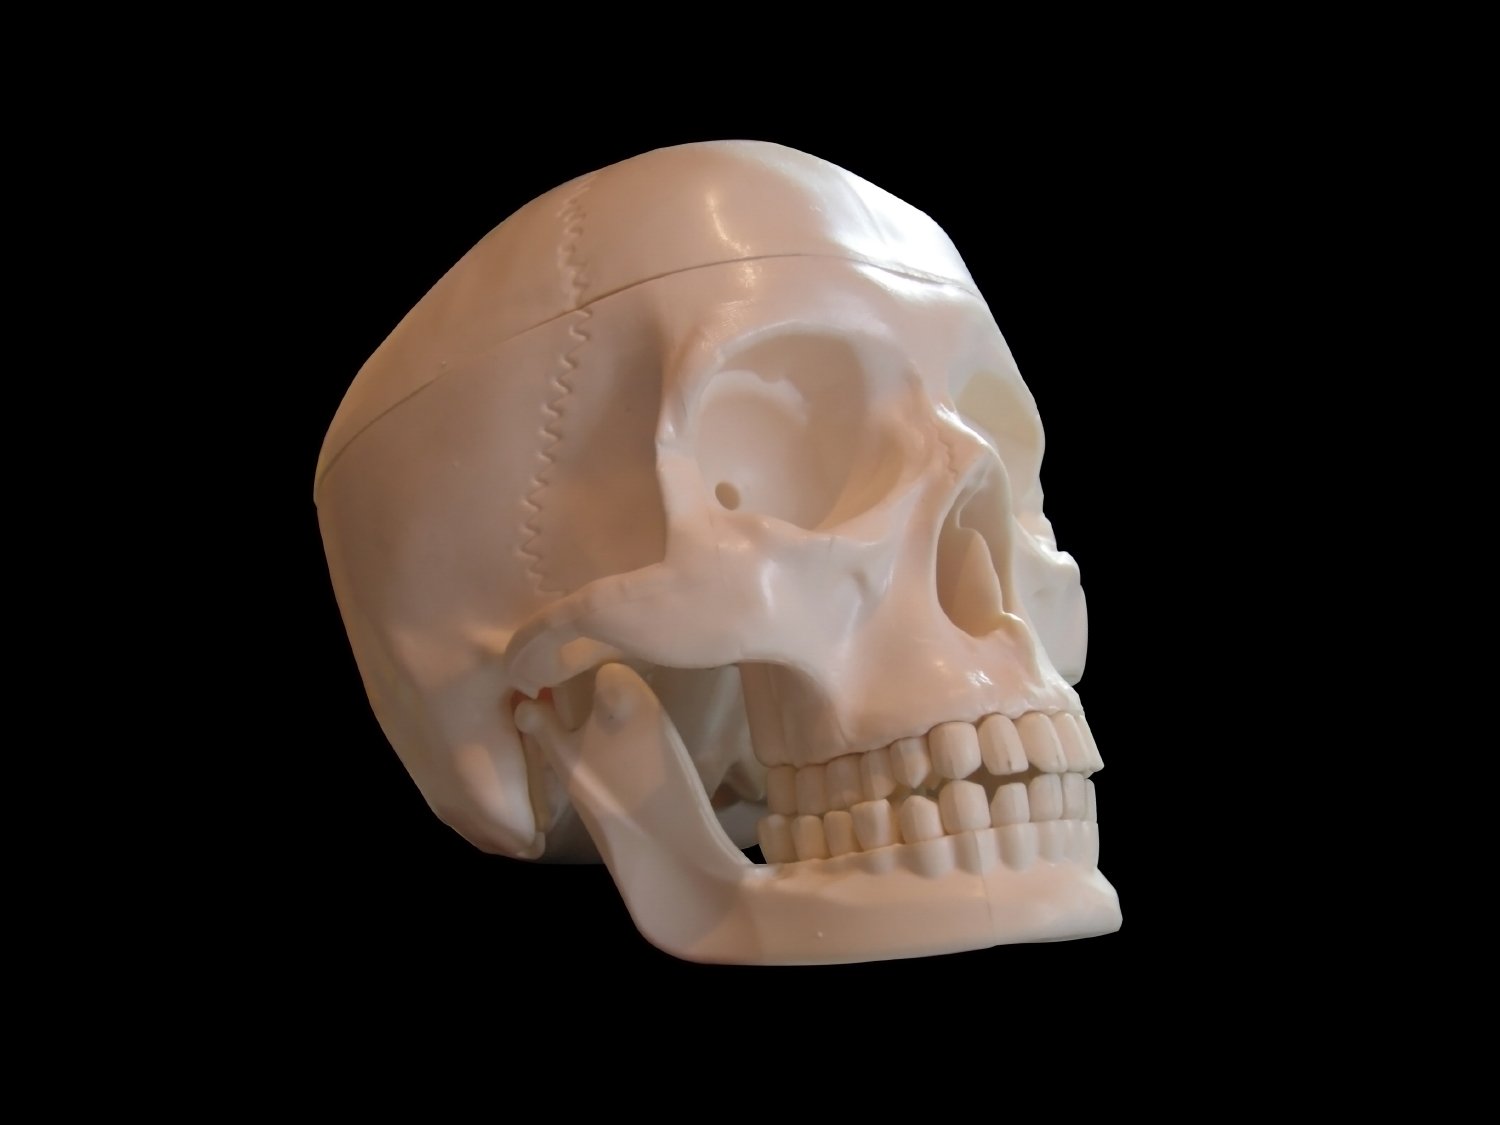 a model of a white human skull against a black background